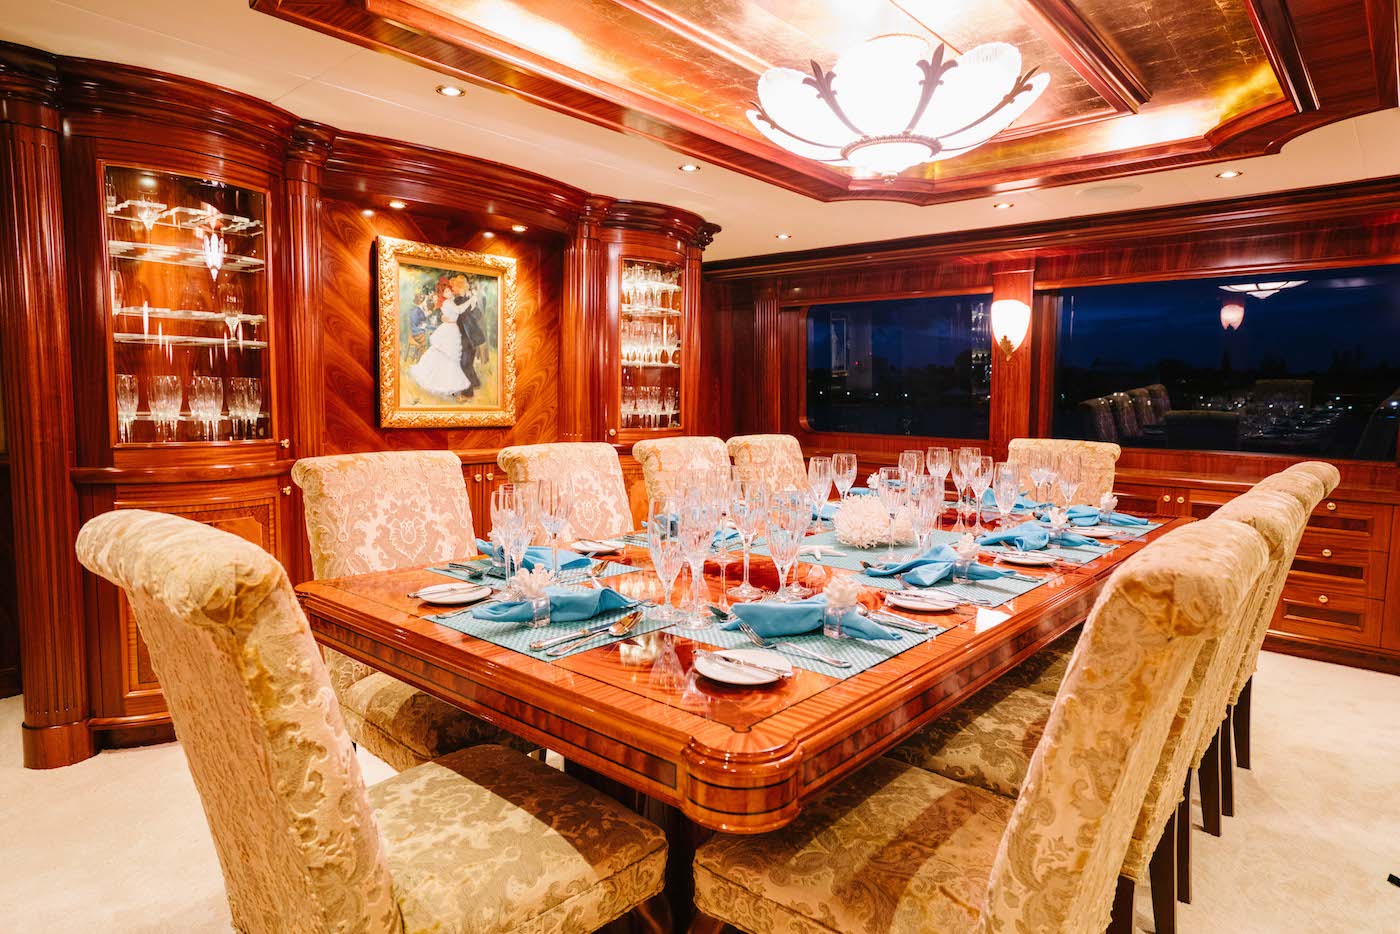 Main Deck Dining Area For Formal Meals